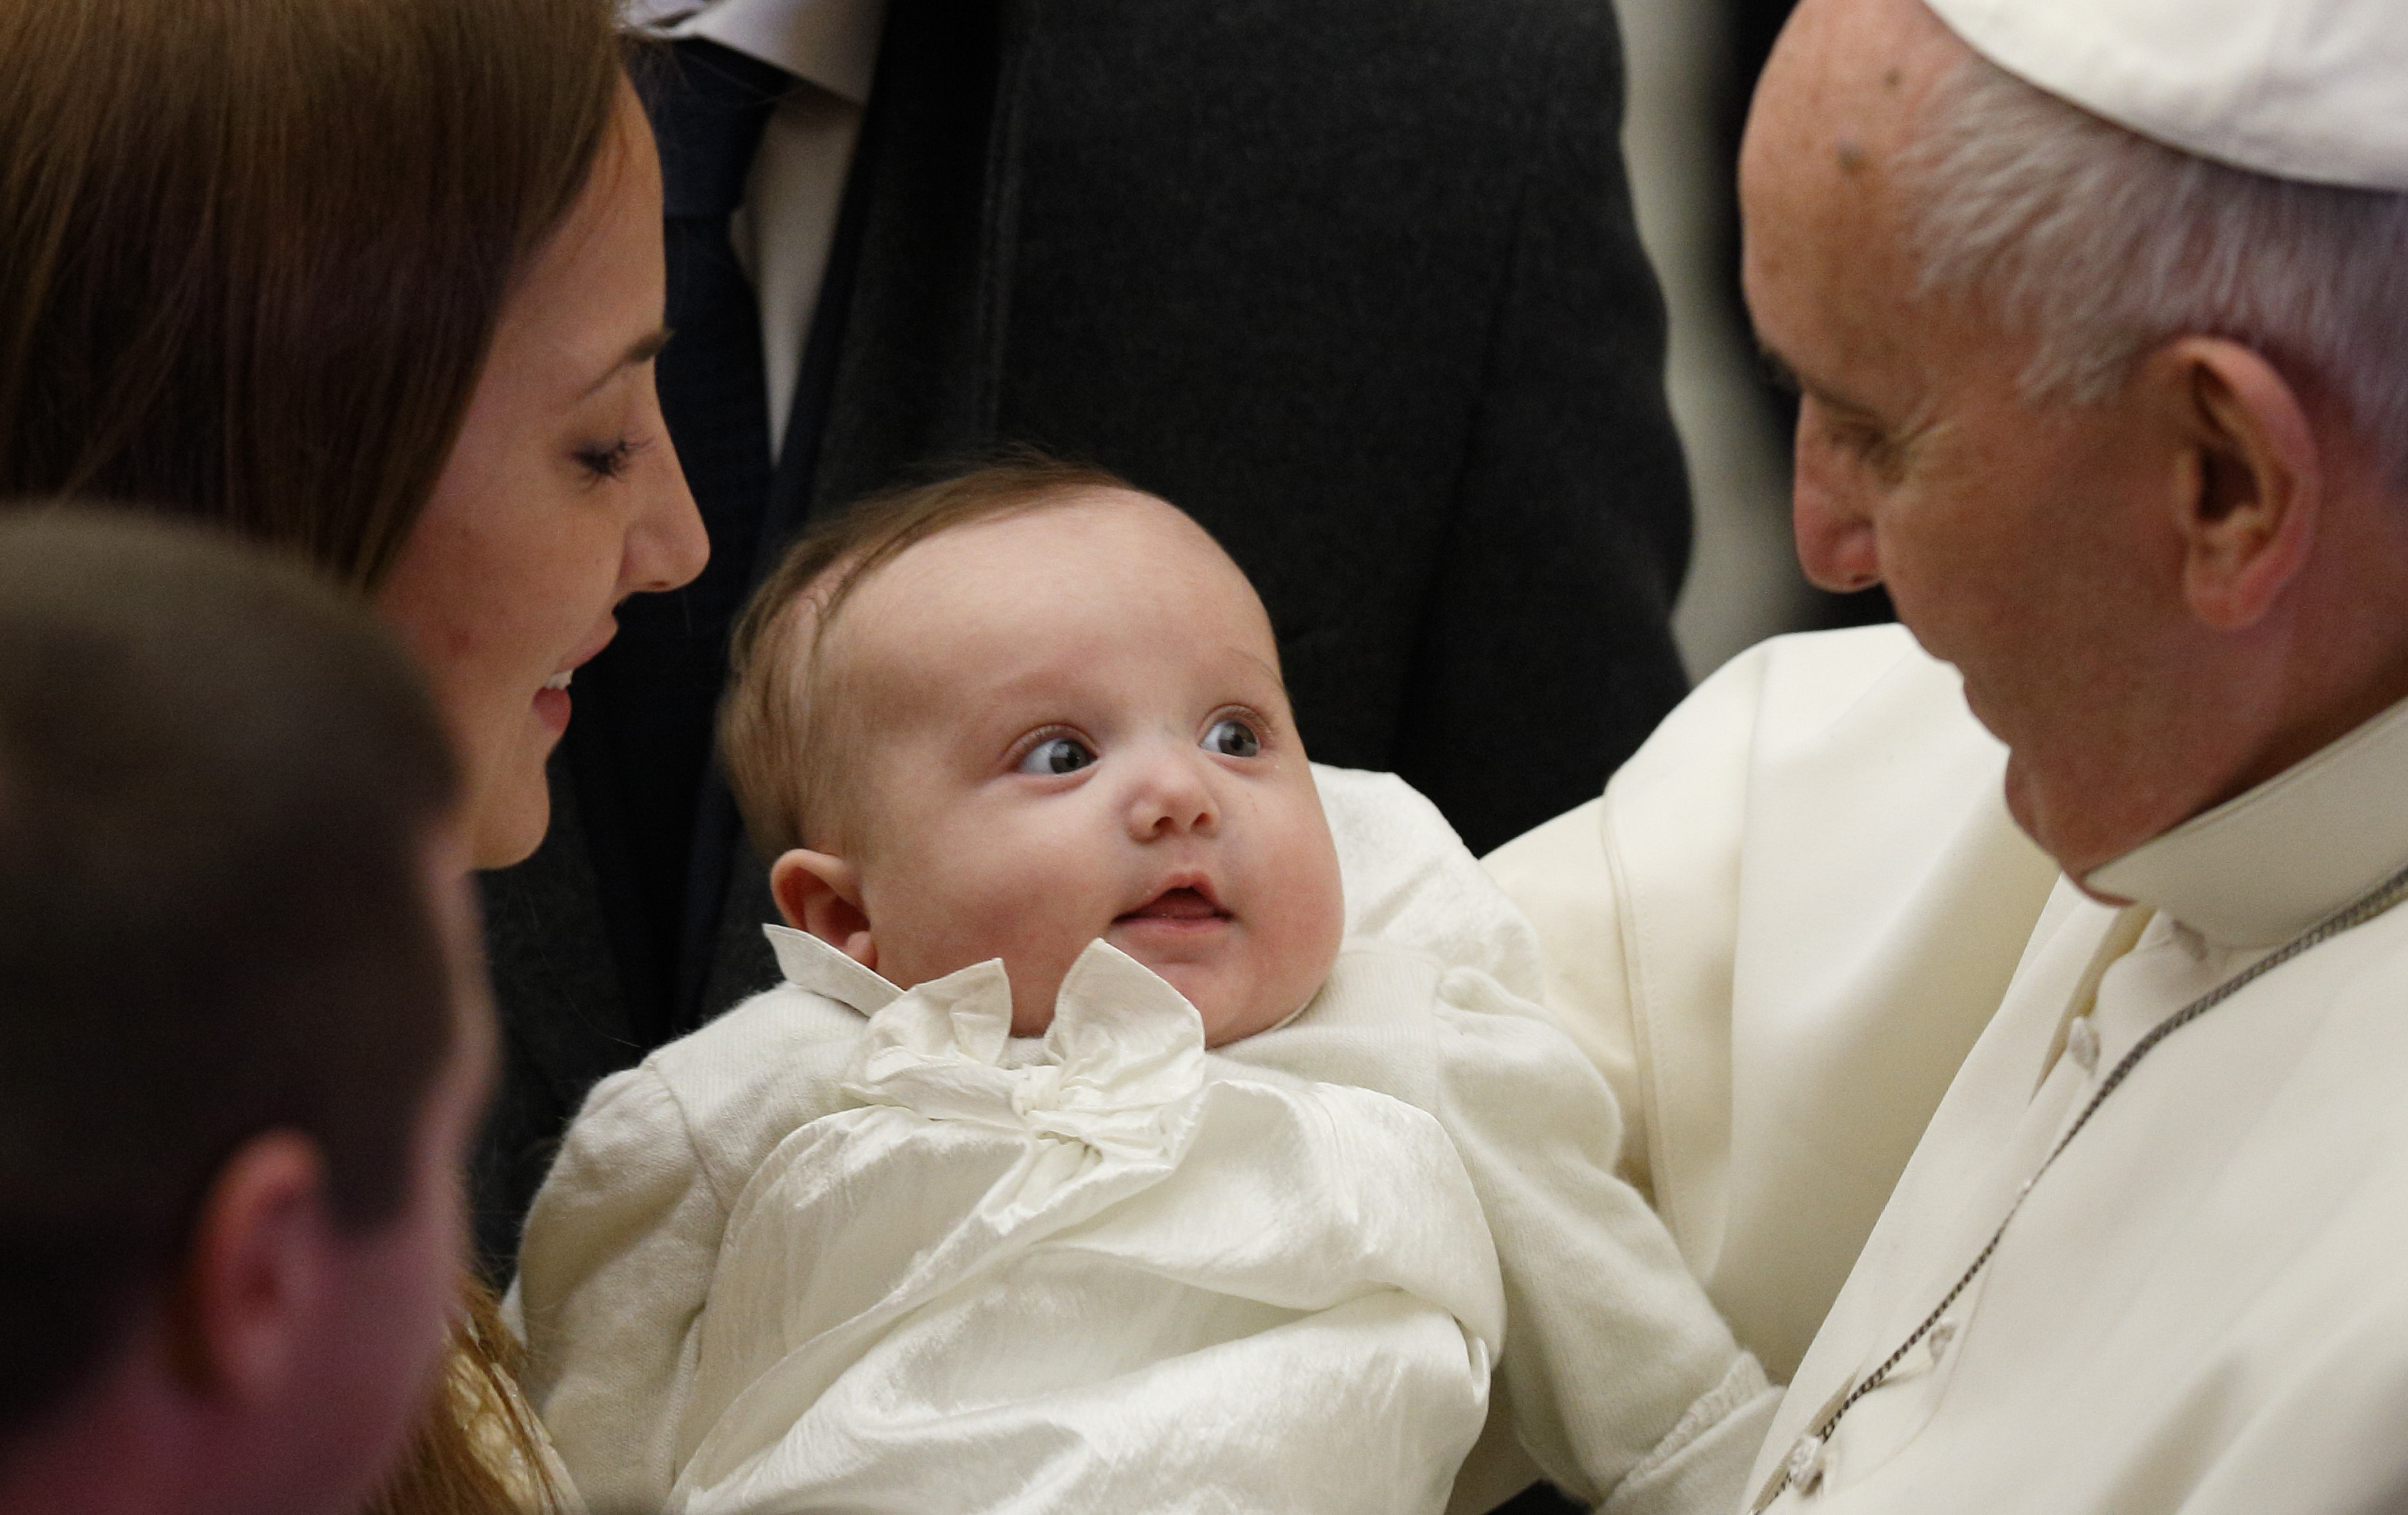 Pope Francis greets a baby during his general audience in Paul VI hall at the Vatican Jan. 7. (CNS photo/Paul Haring) See POPE-AUDIENCE Jan. 7, 2015.